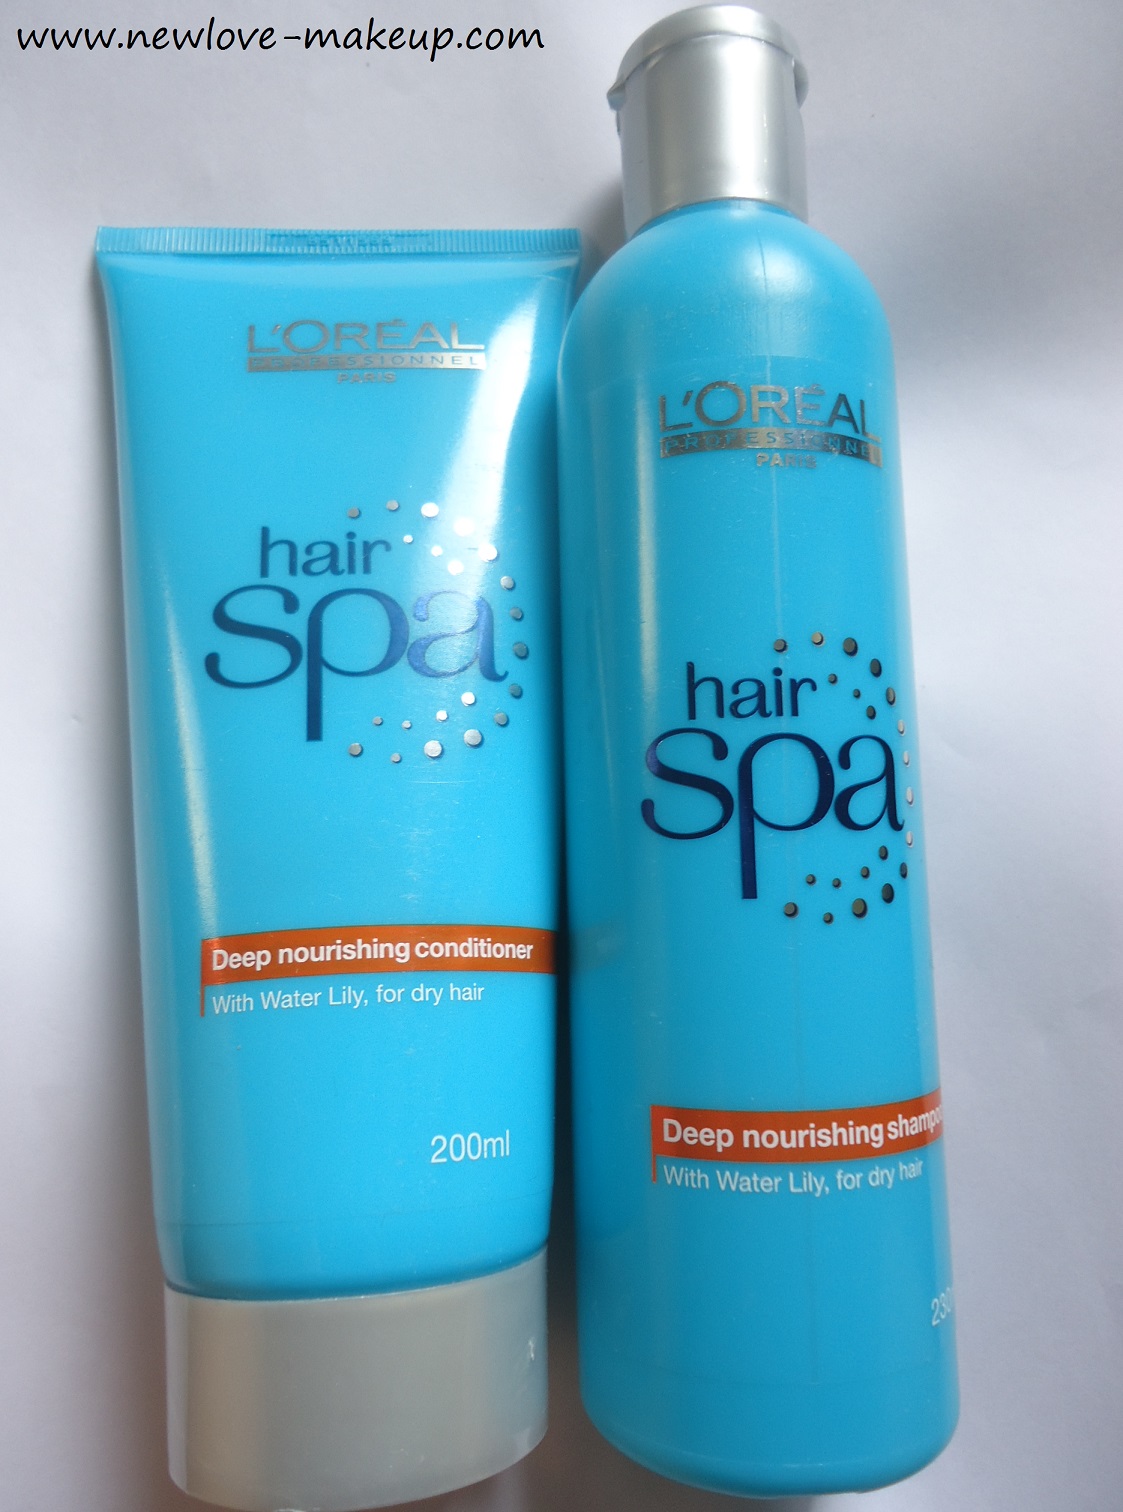 L'Oreal Professionnel Hair Spa Deep Nourishing Shampoo,Conditioner Review -  New Love - Makeup